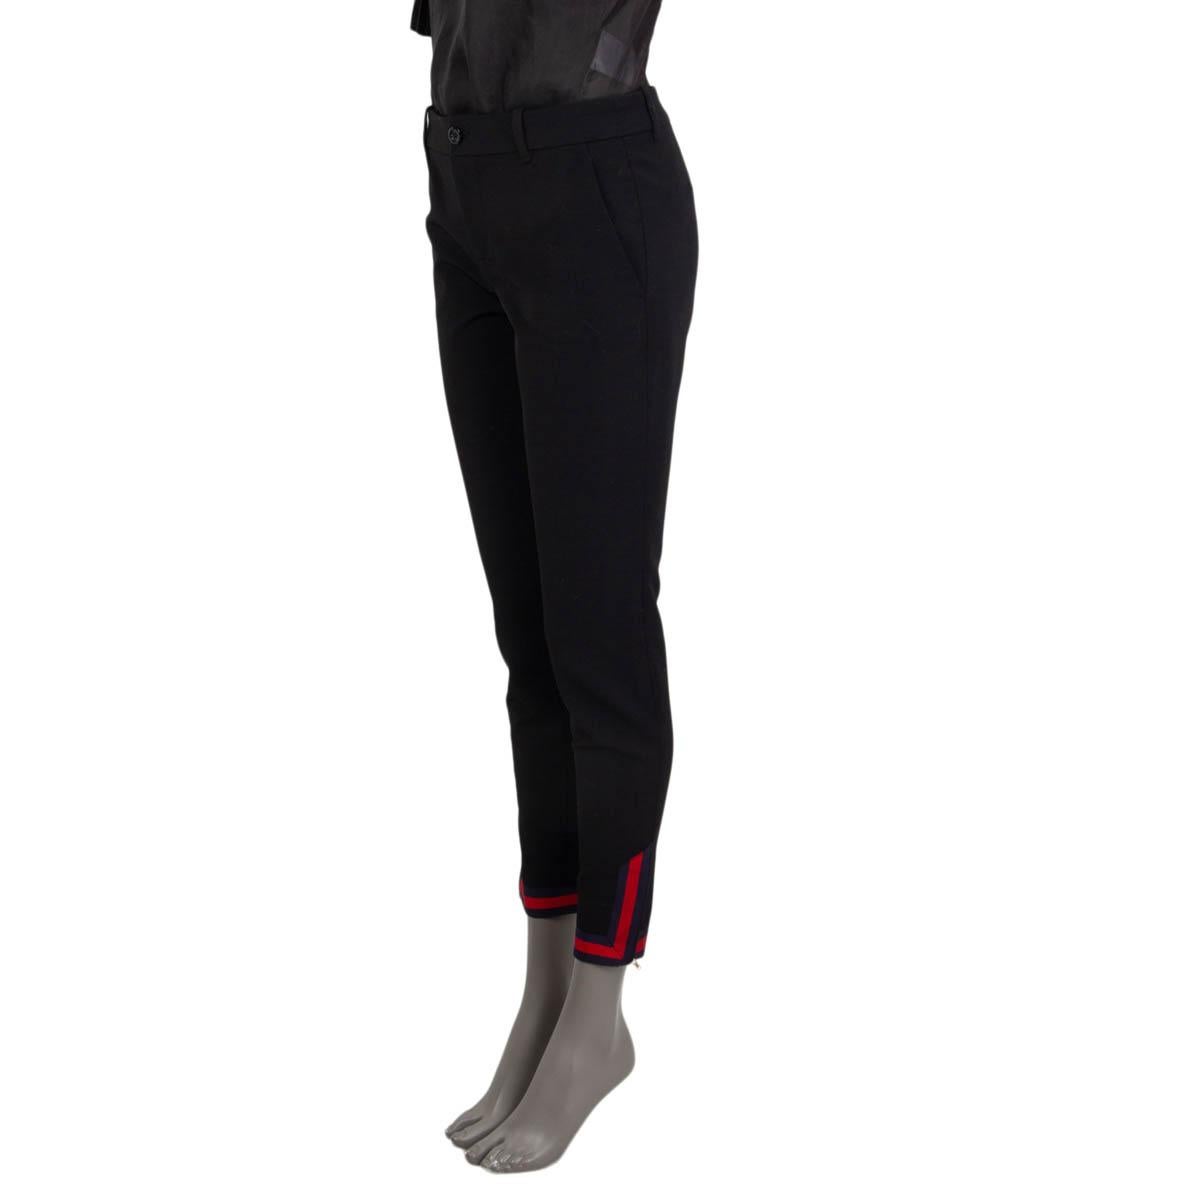 100% authentic Gucci suit pants in black cotton (52%), polyamide (38%) and elastane (10%). Feature zipped, striped cuffs and two slit pockets on the front. Open with two buttons and a zipper at the front. Pockets lined in black viscose (64%) and